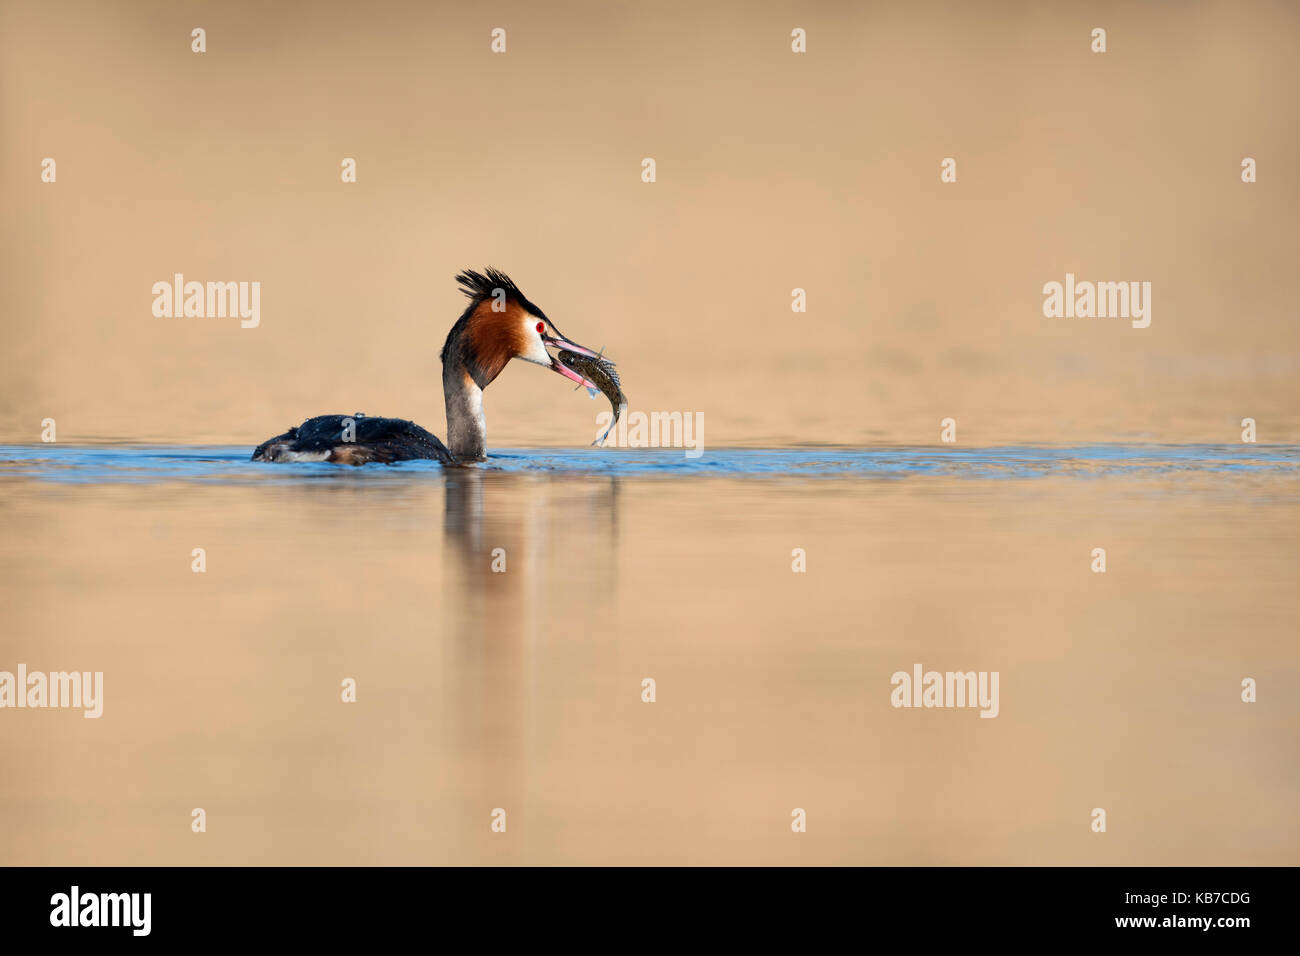 Great Crested Grebe (Podiceps cristatus) swimming in calm water in the golden hour with a fish, The Netherlands, Flevoland, Vossemeer Stock Photo